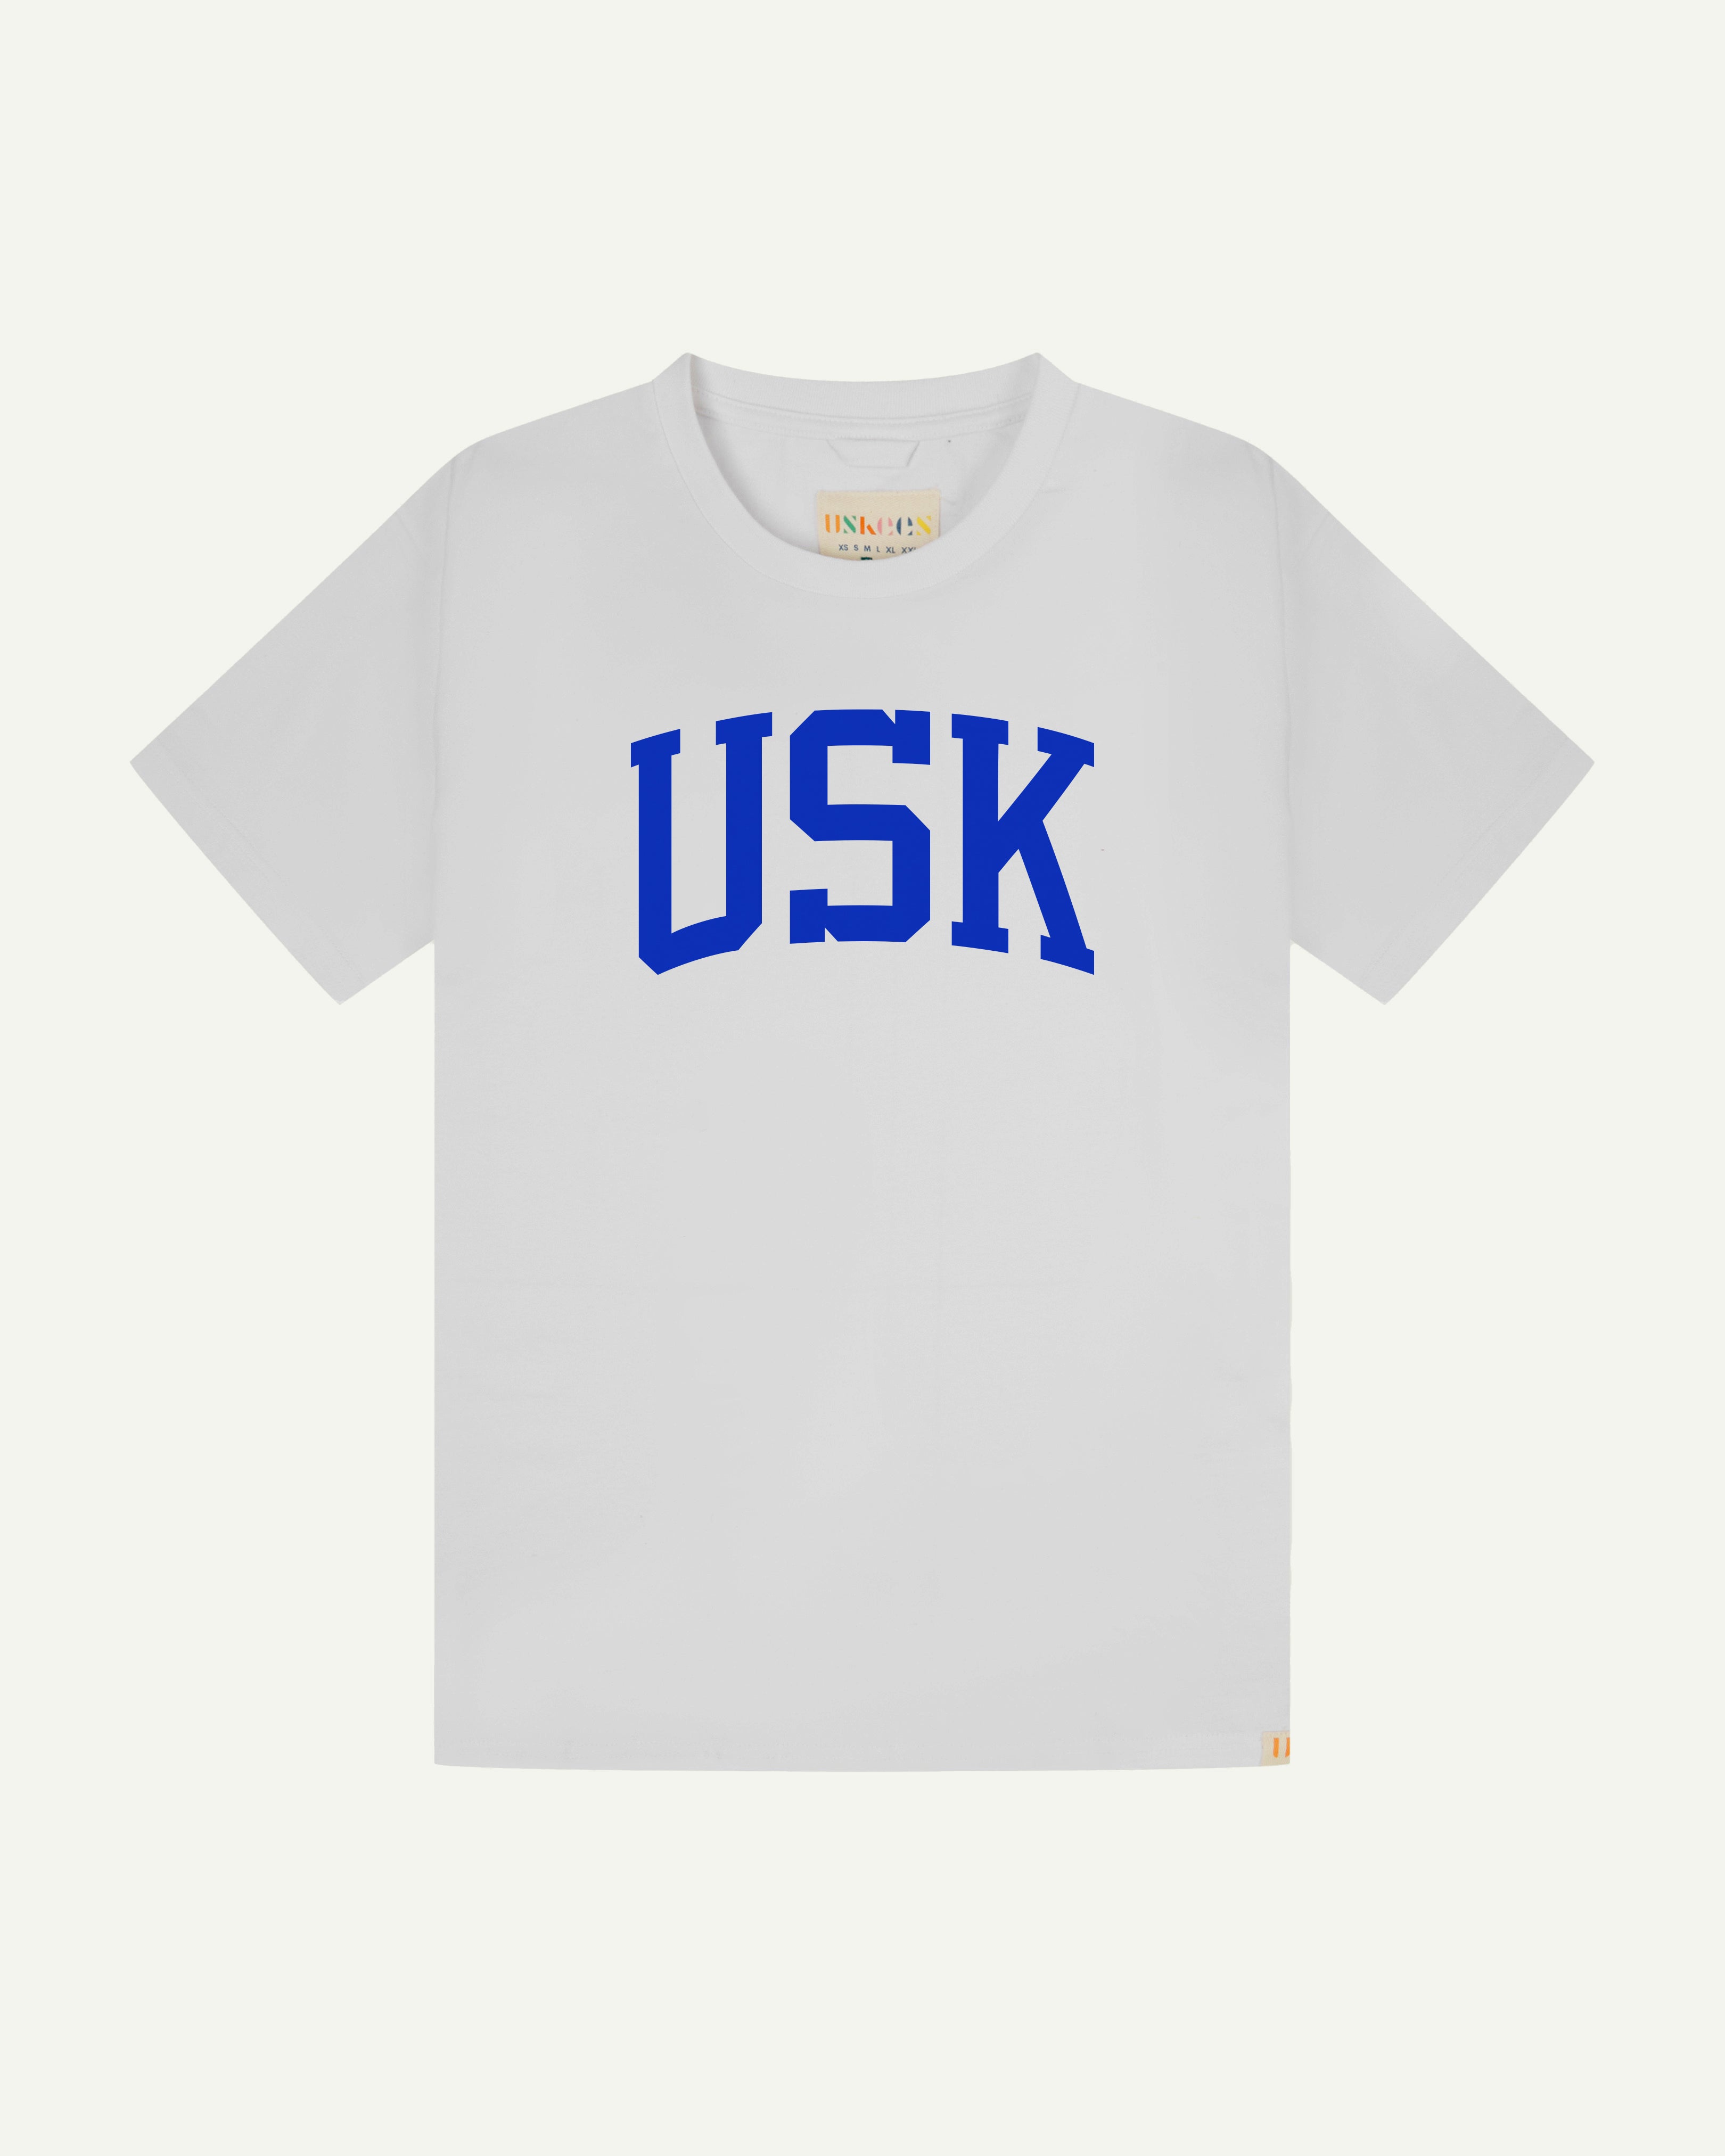 Flat shot of front of men's white short sleeve t-shirt with the signature USK logo on the front in blue.